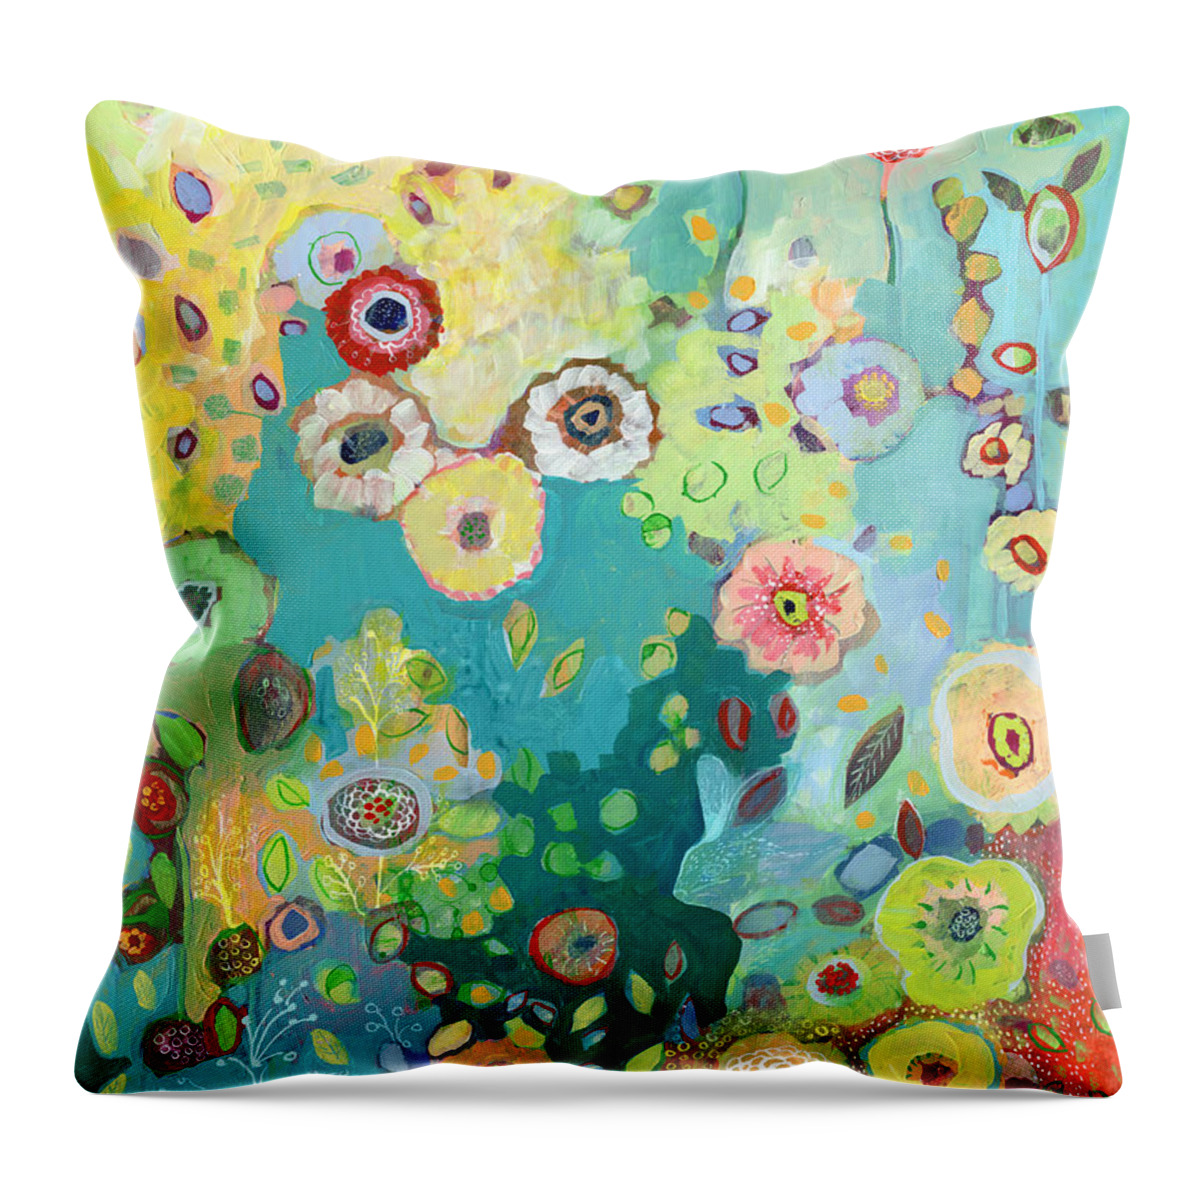 Floral Throw Pillow featuring the painting I Am by Jennifer Lommers